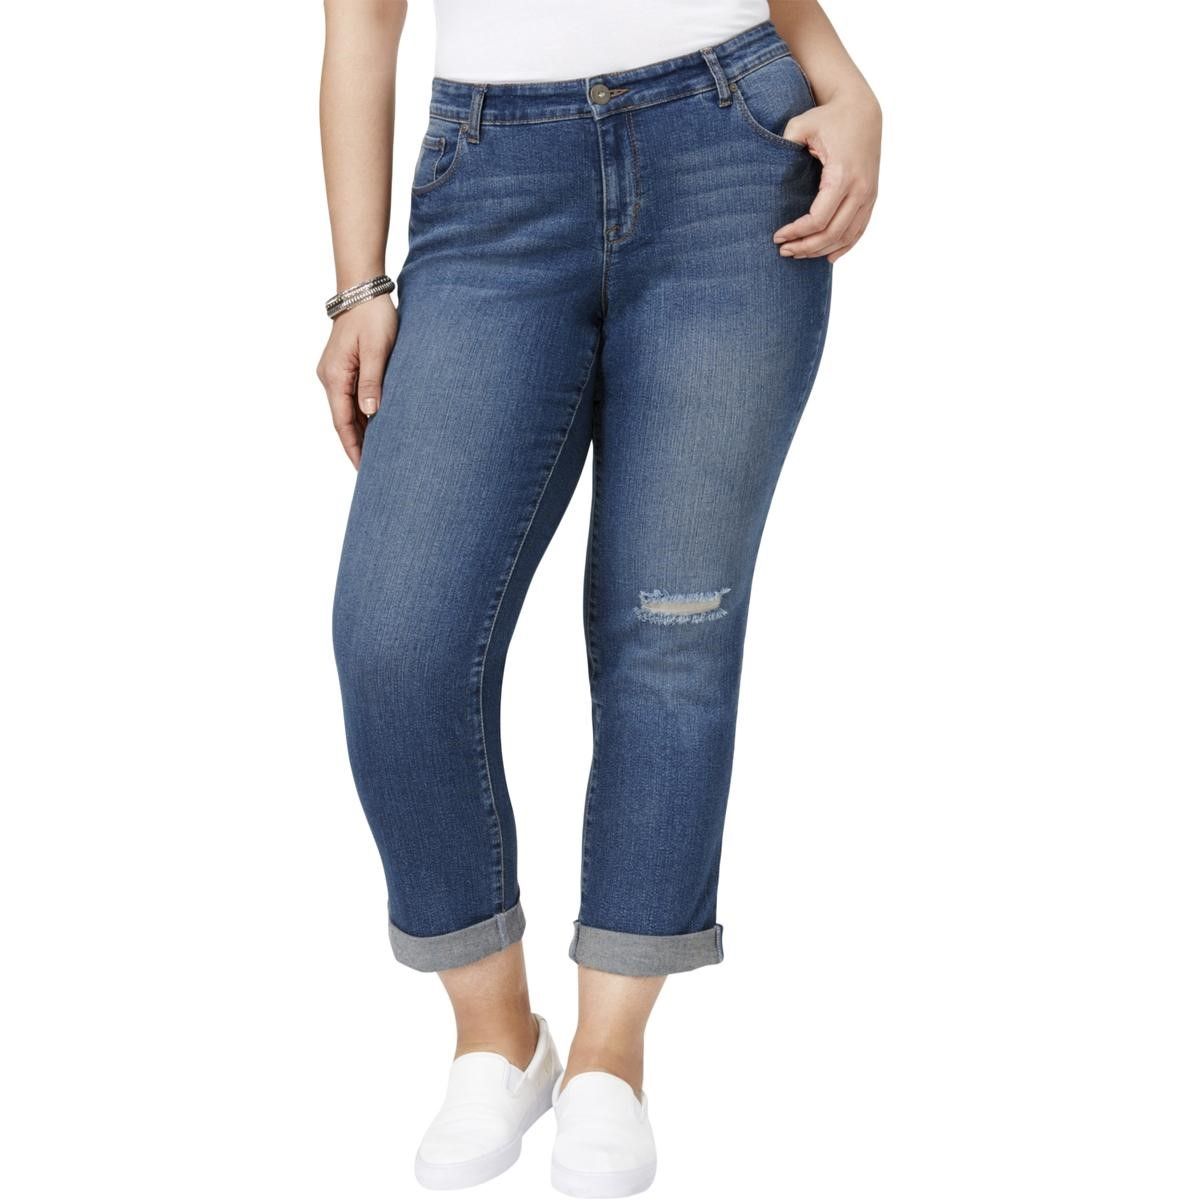 7 classic pairs of denim every woman needs in her closet